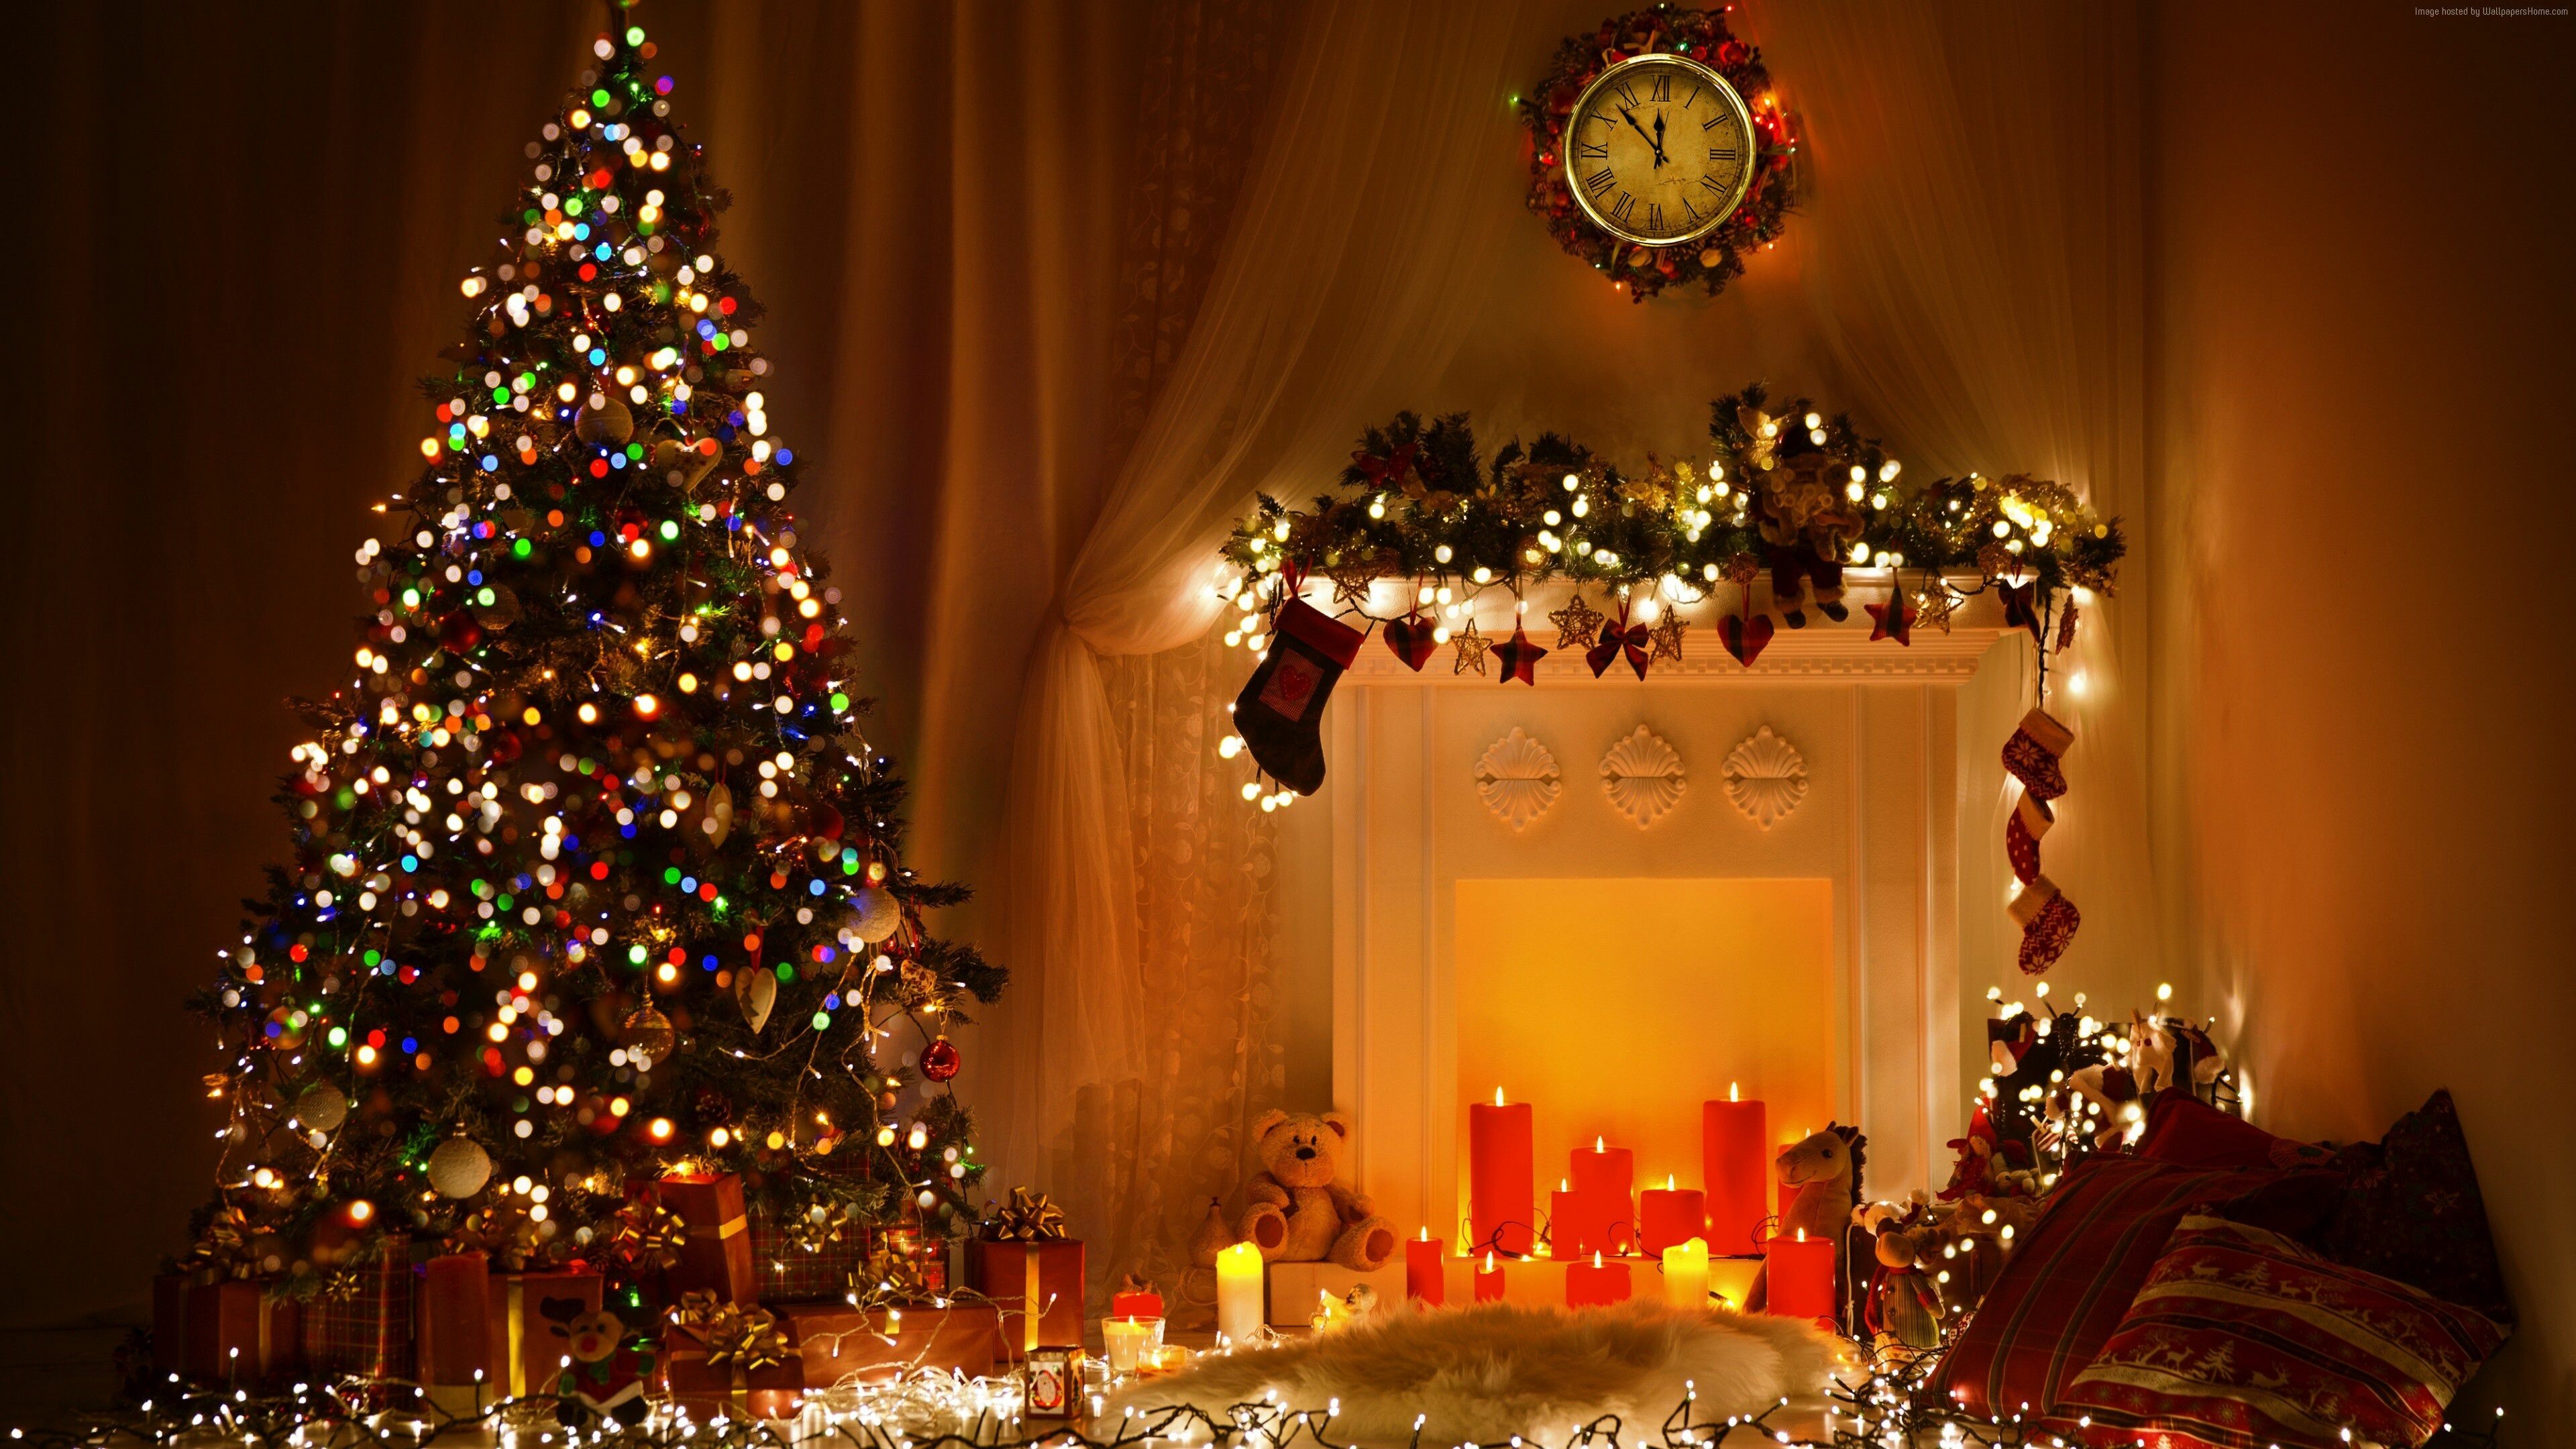 Christmas Fireplace: New Year, Toys, Decorations, Candles. 3840x2160 4K Wallpaper.